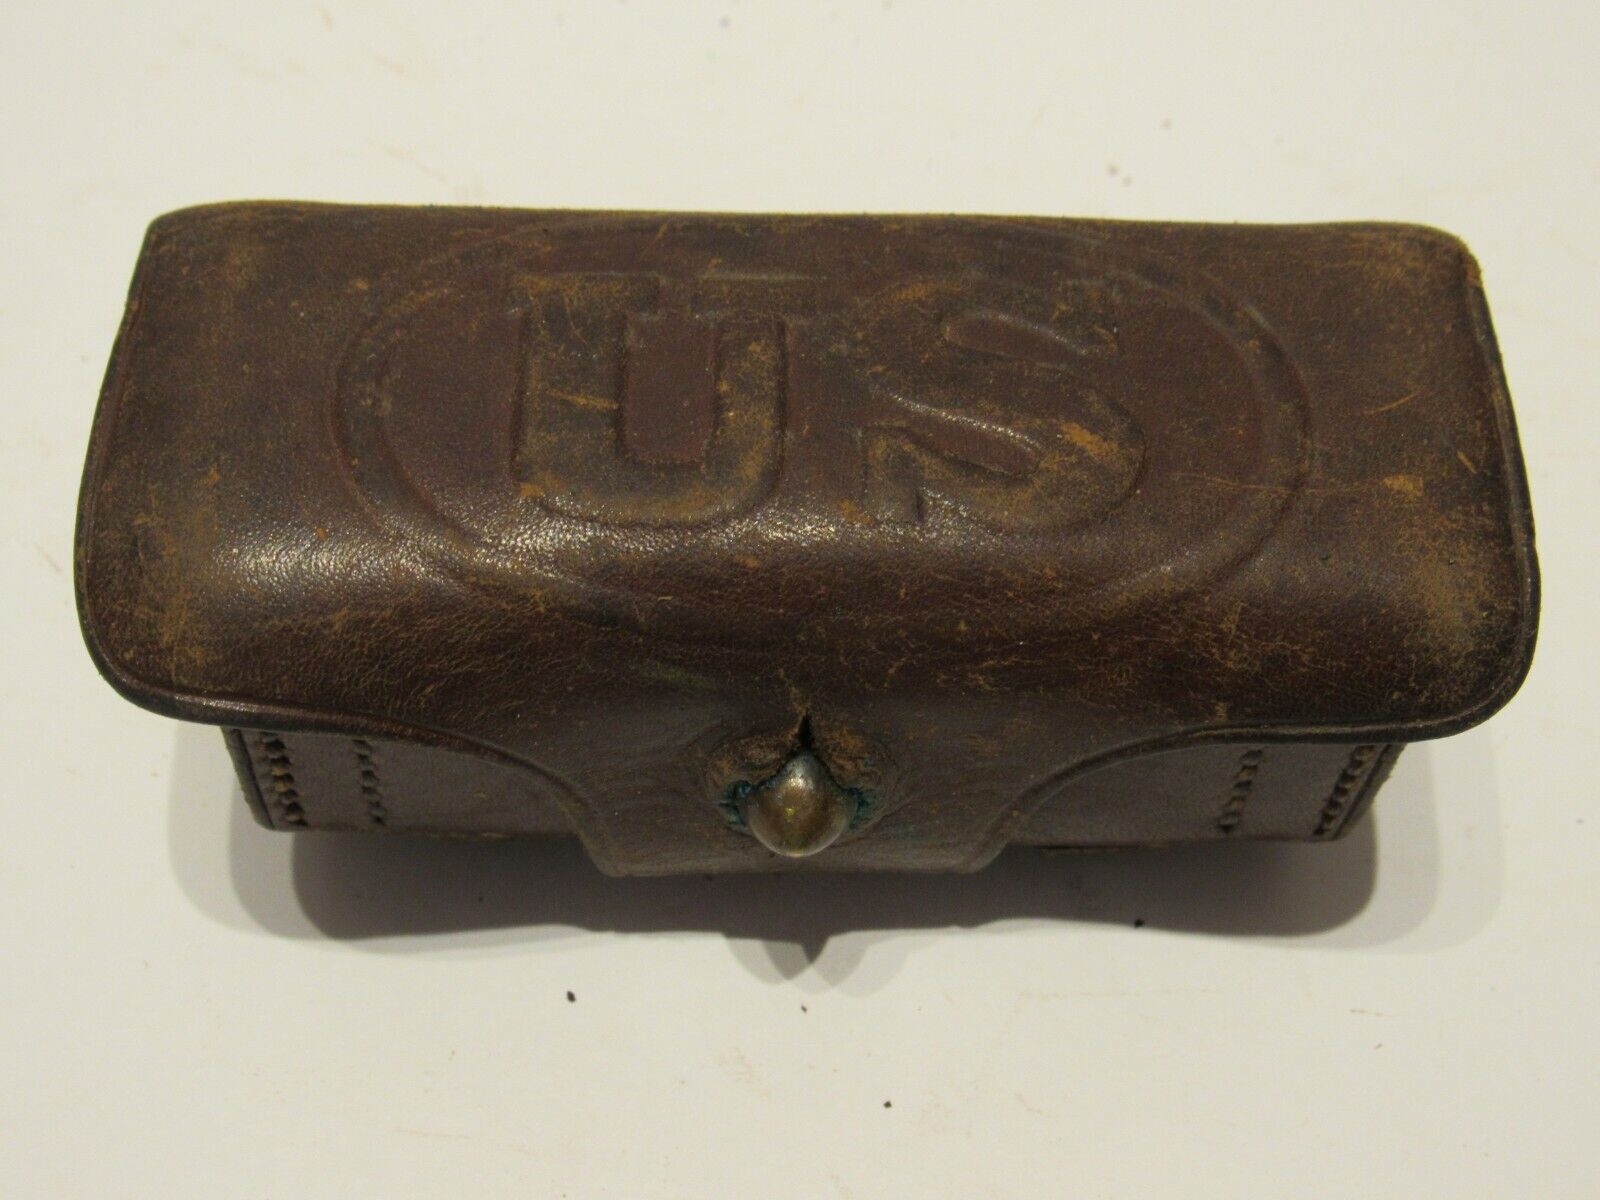 Original US Army 1906 Pattern Leather .38 Pistol Cartridge Pouch  RIA